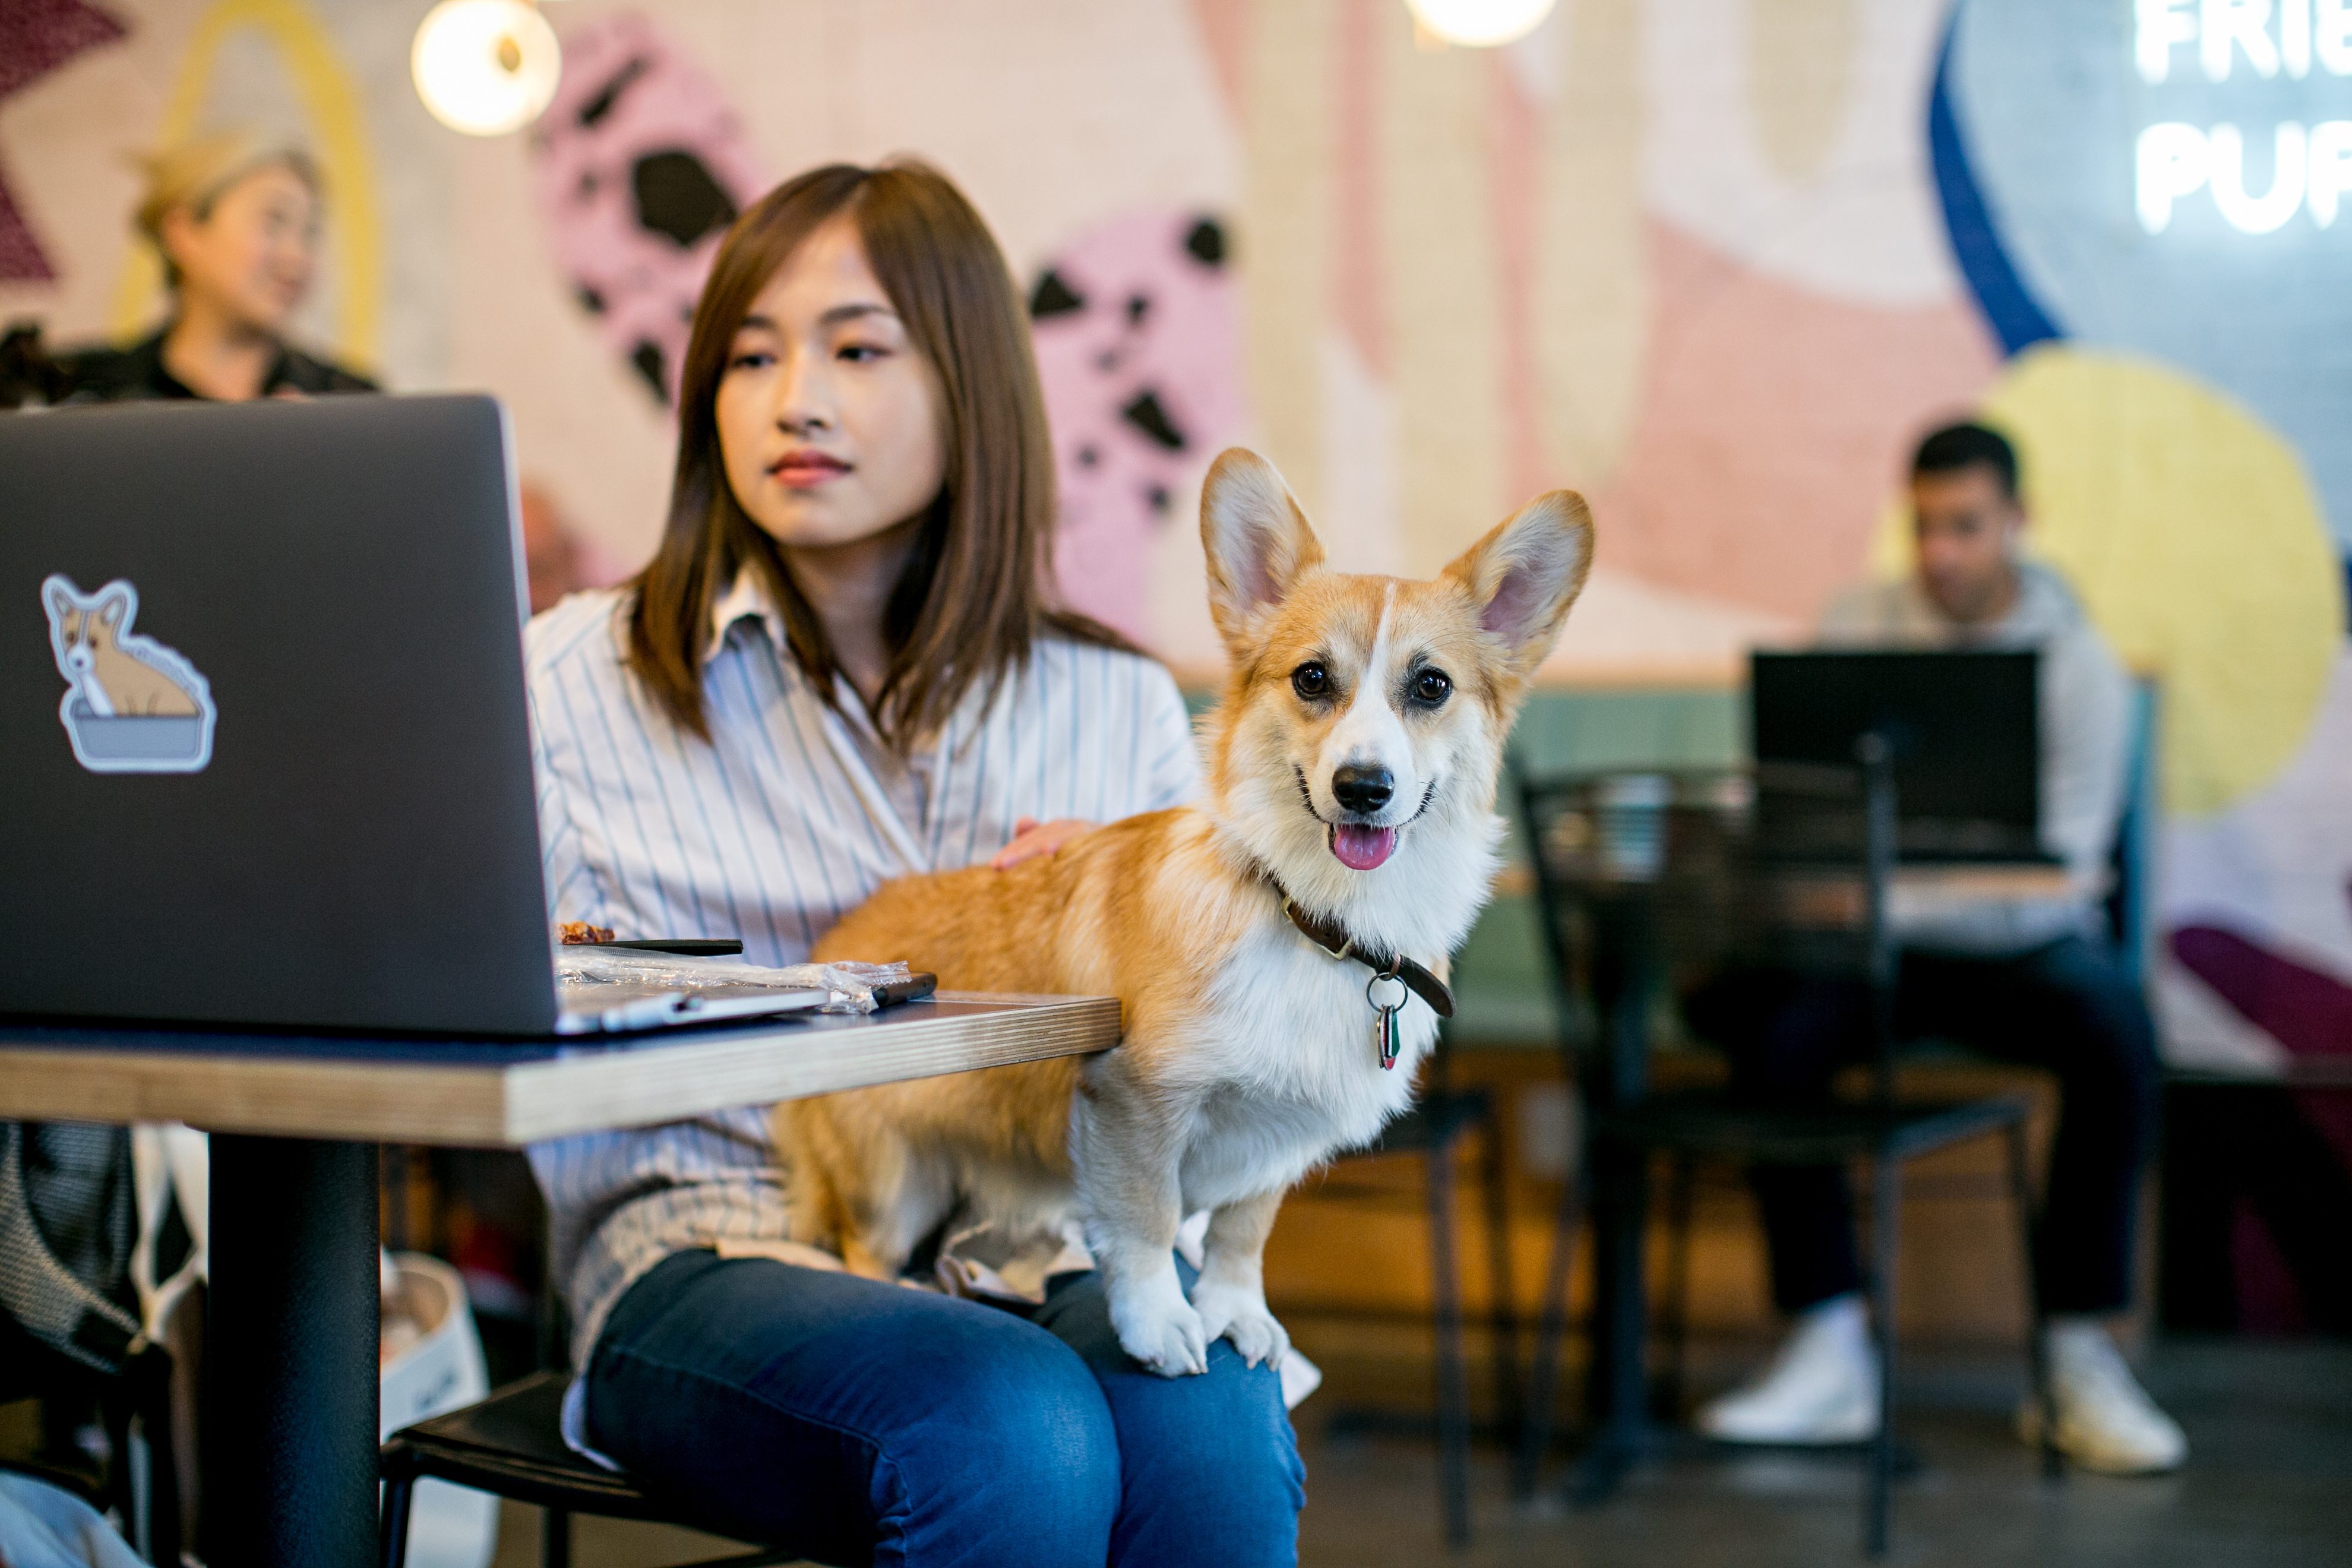 A woman sits at her laptop with a dog on her lap.